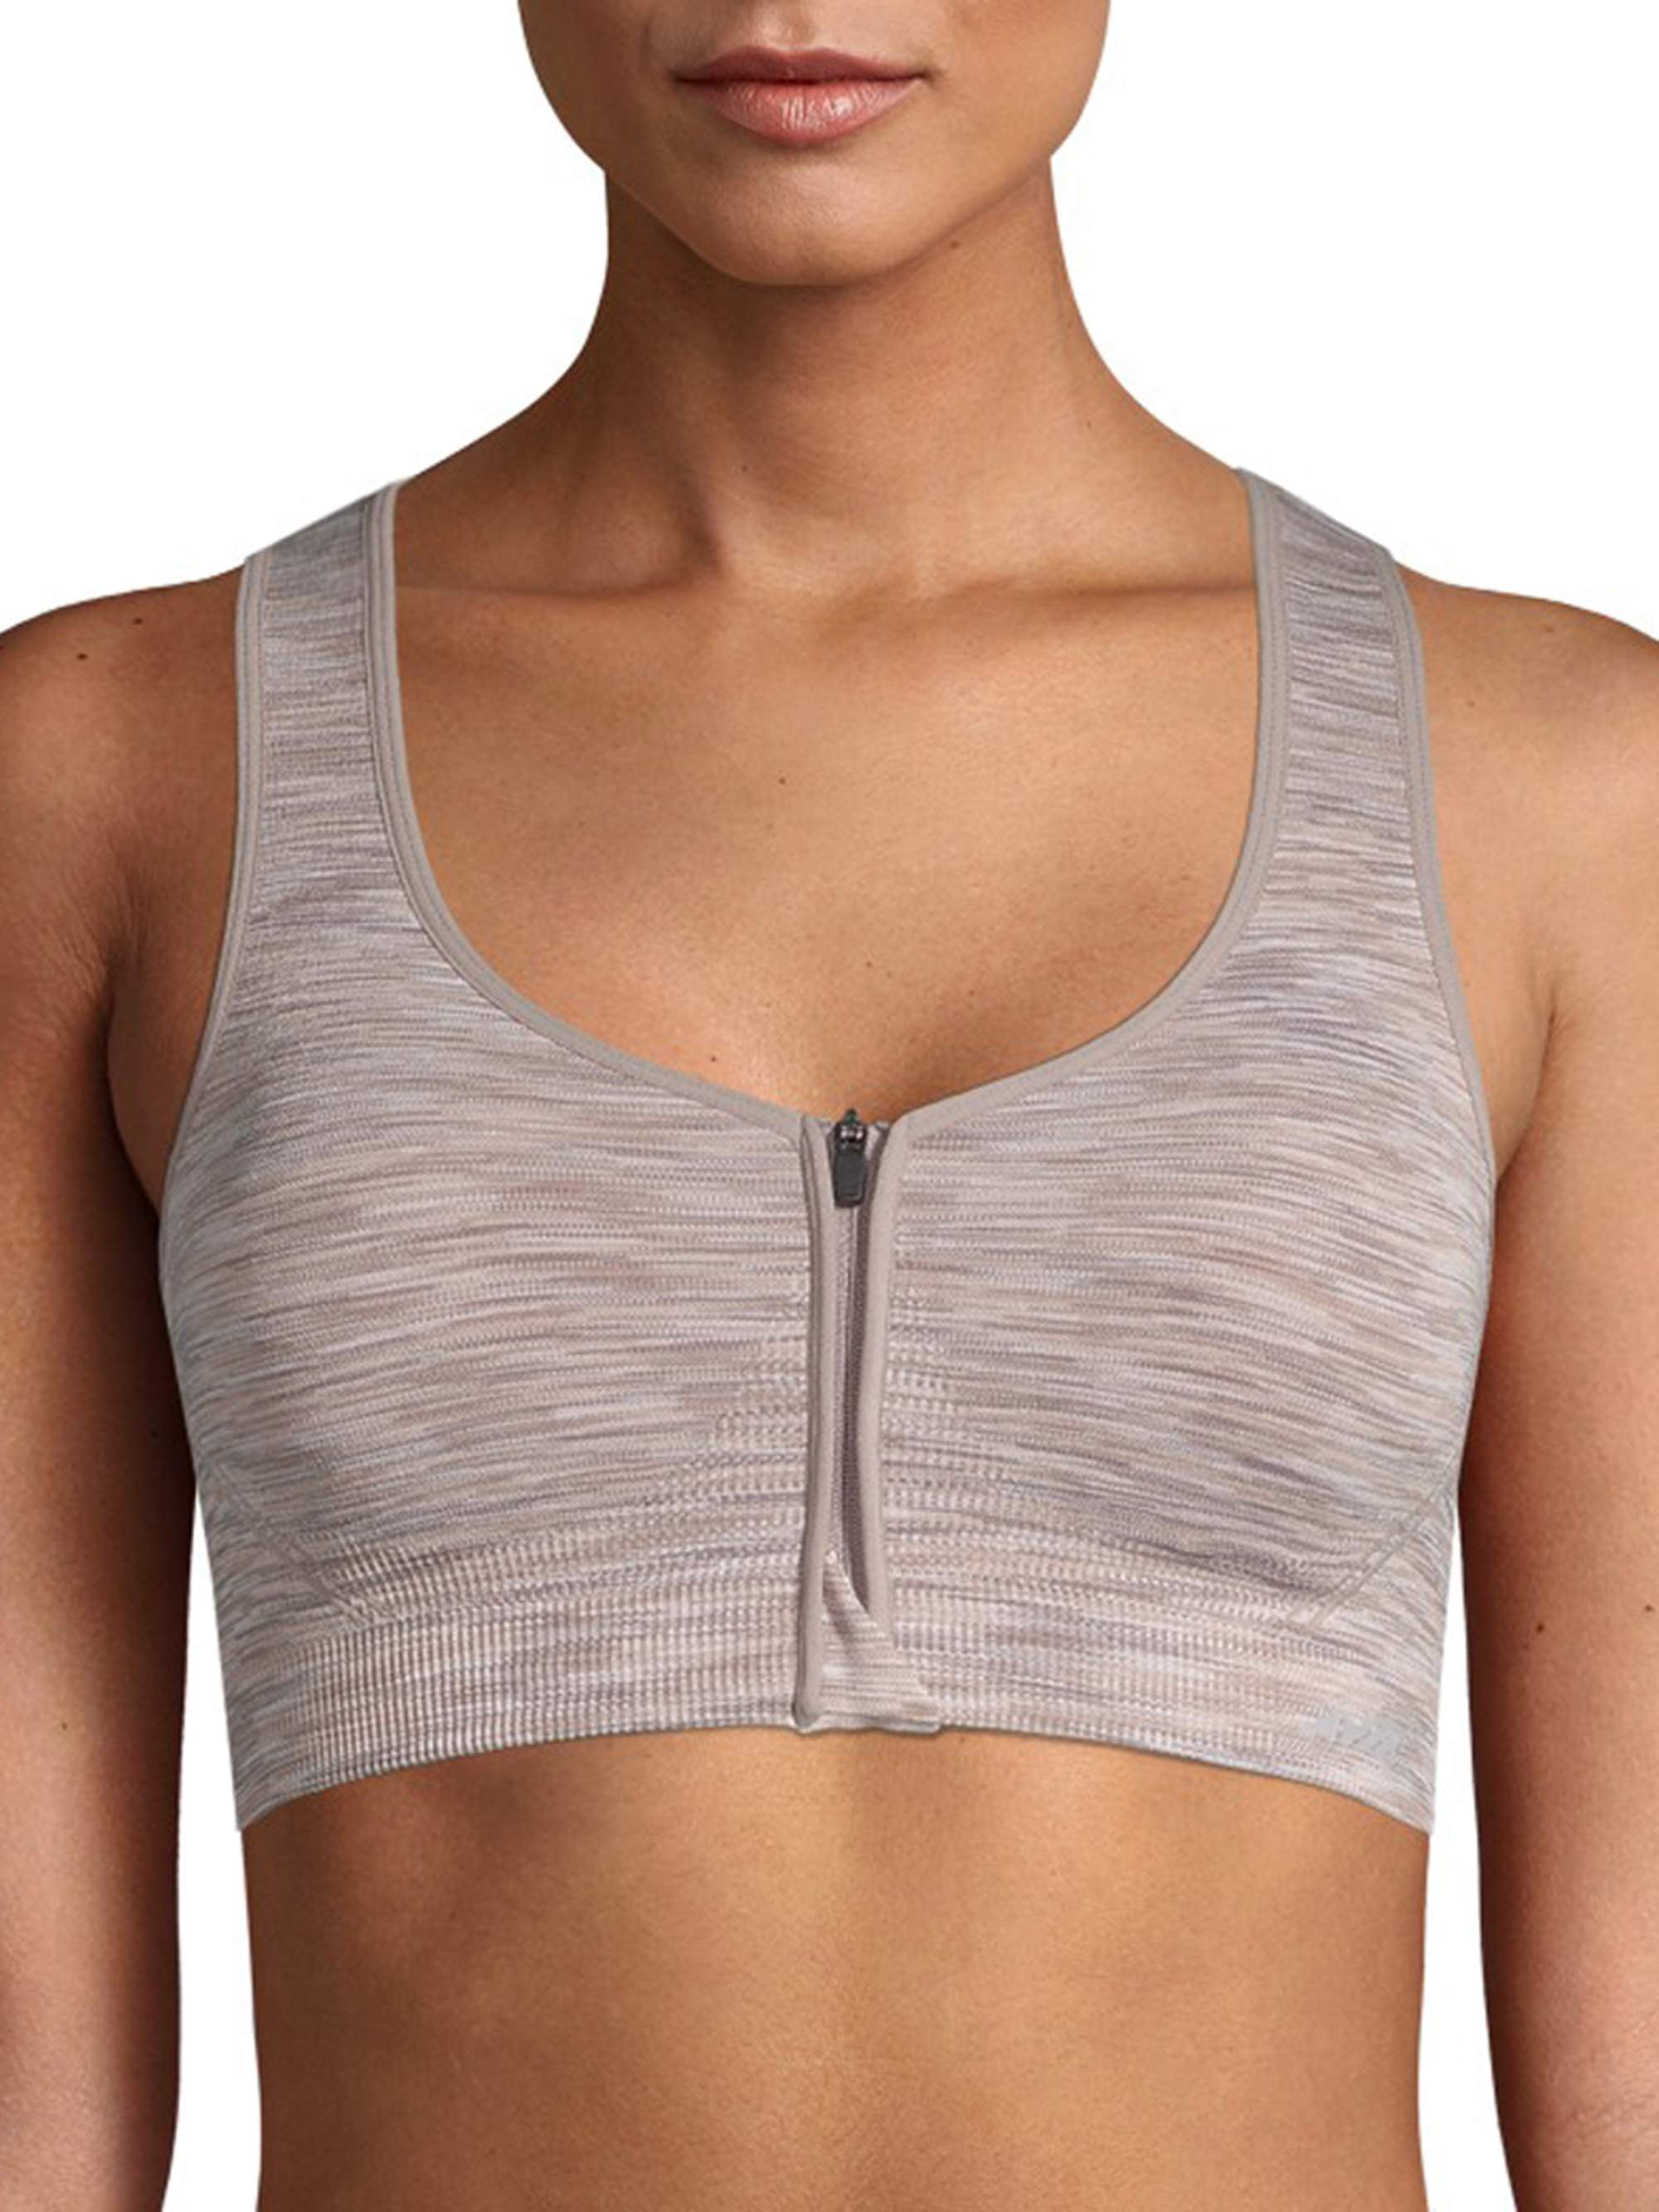 Avia Beige Zip Front Sports Bra Size XL - $8 New With Tags - From